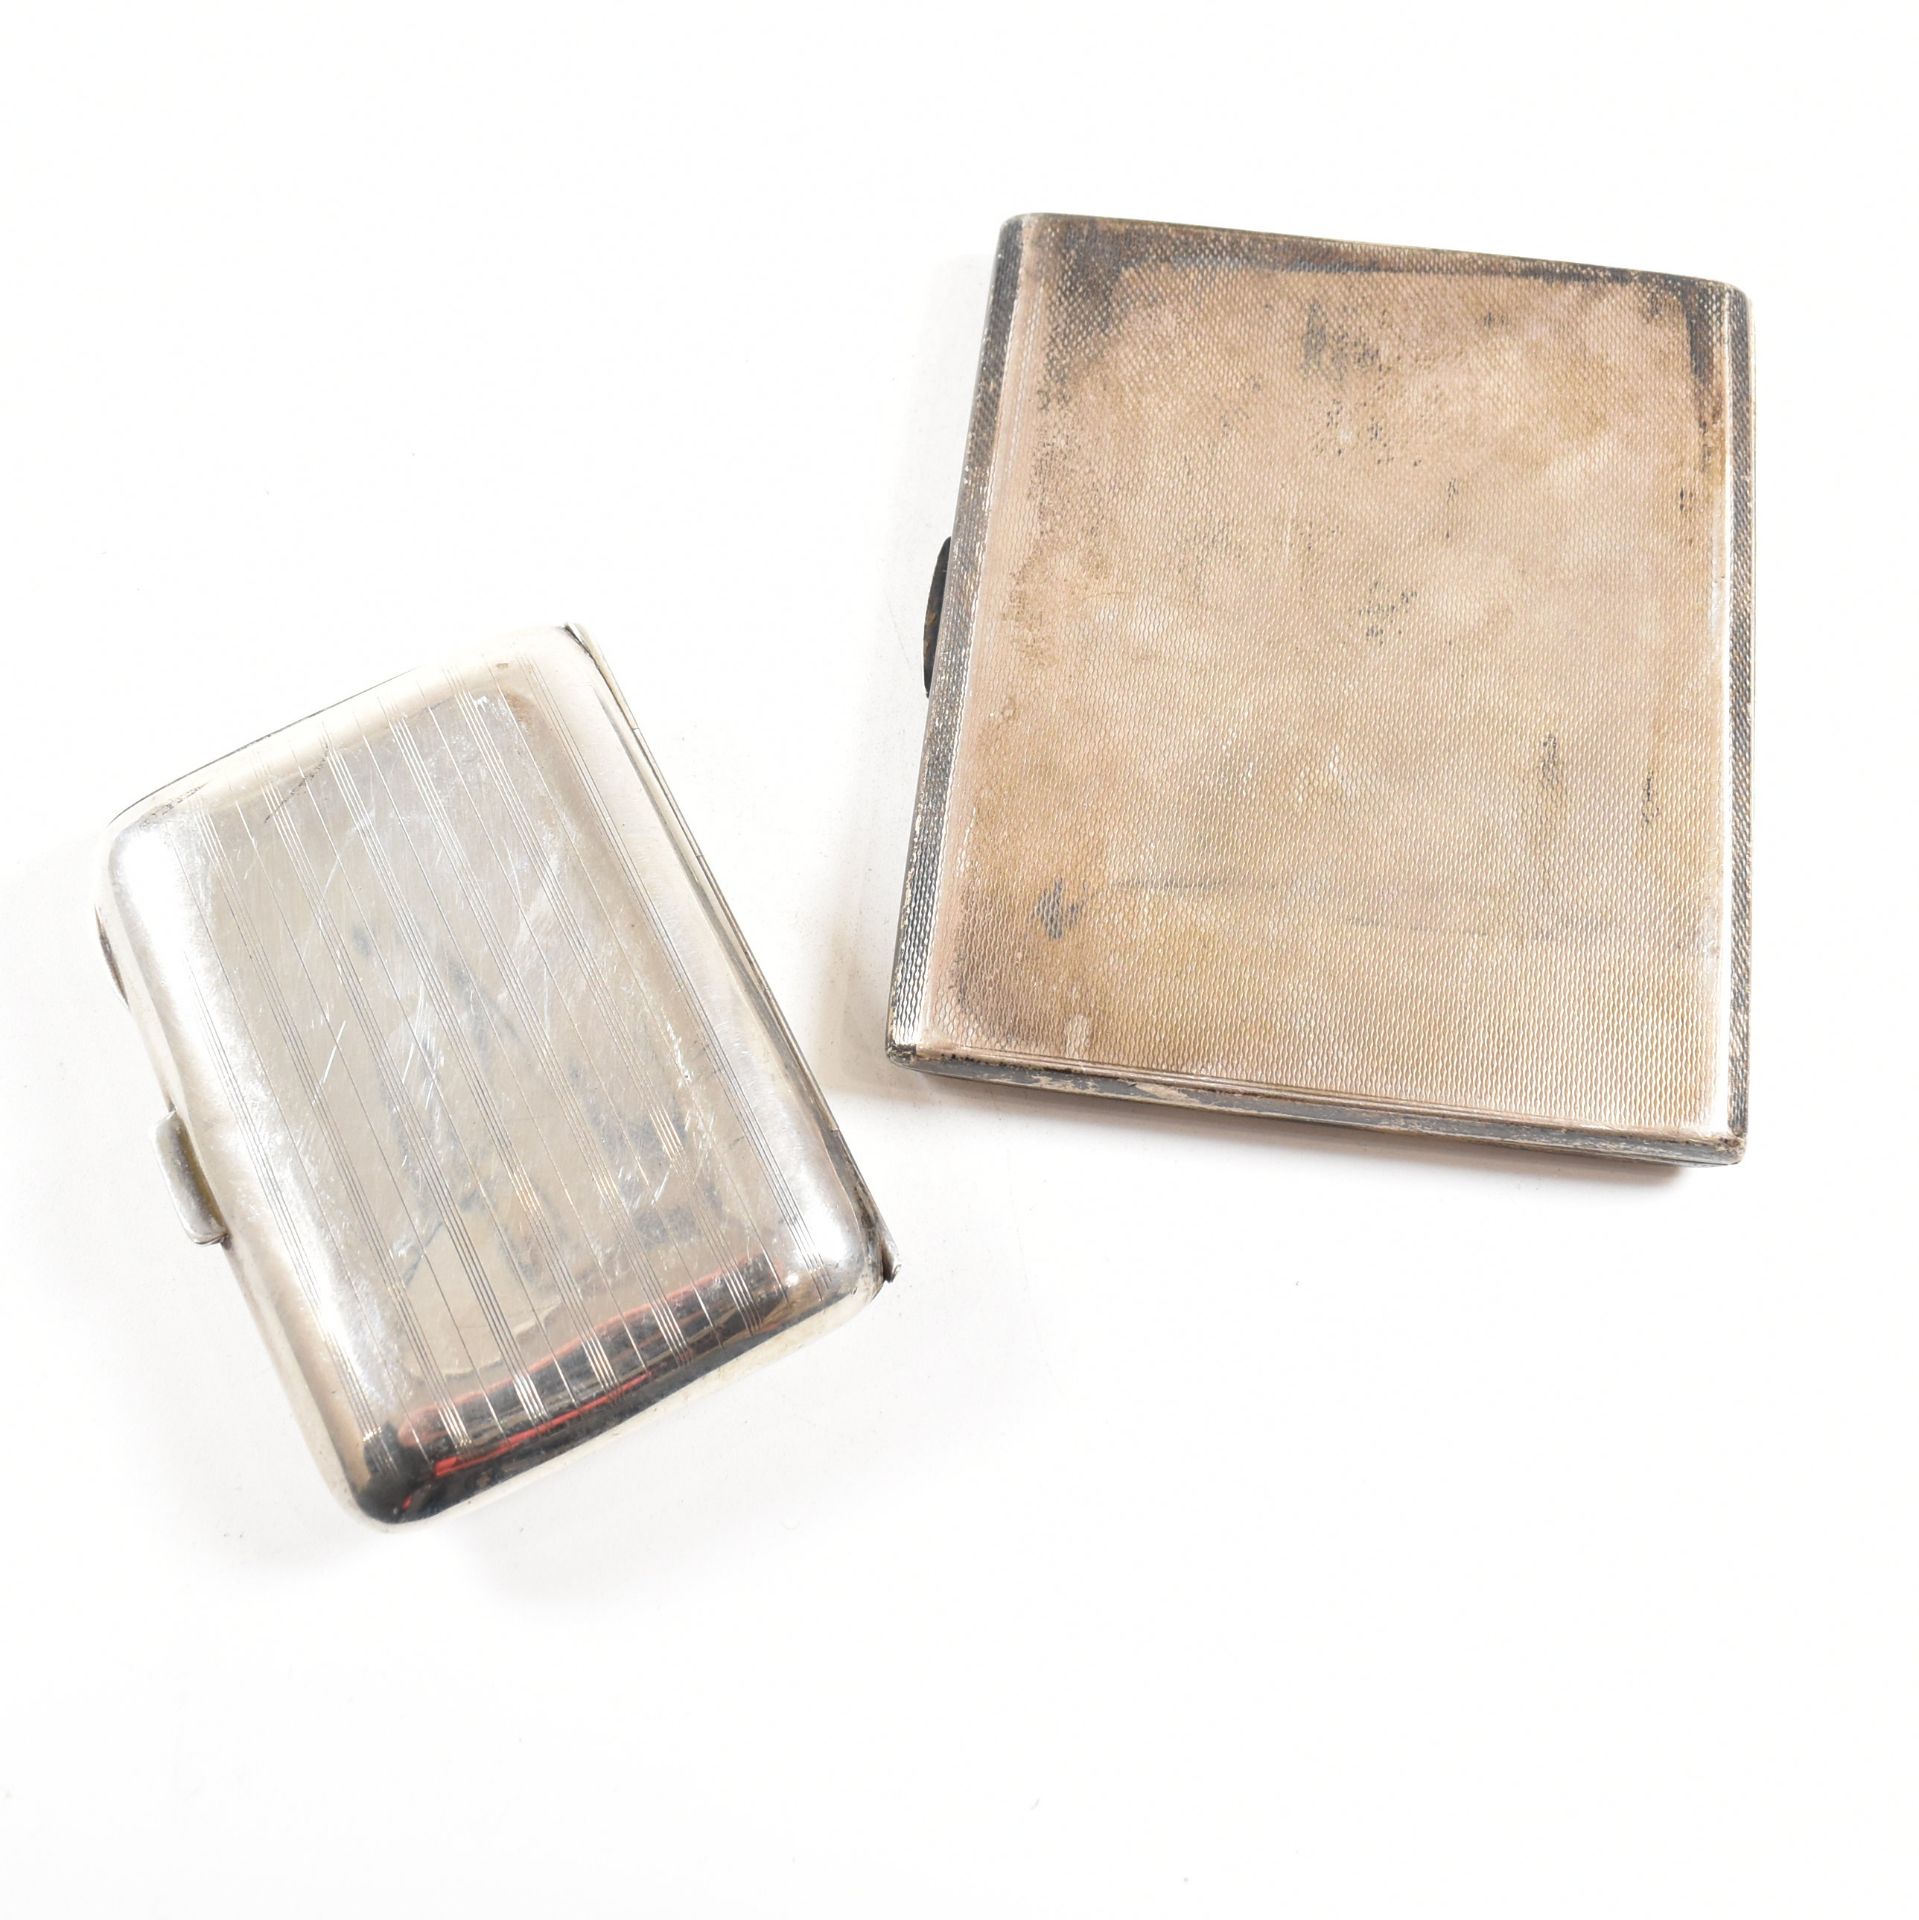 TWO EARLY 20TH CENTURY HALLMARKED SILVER CIGARETTE CASES - Image 4 of 8